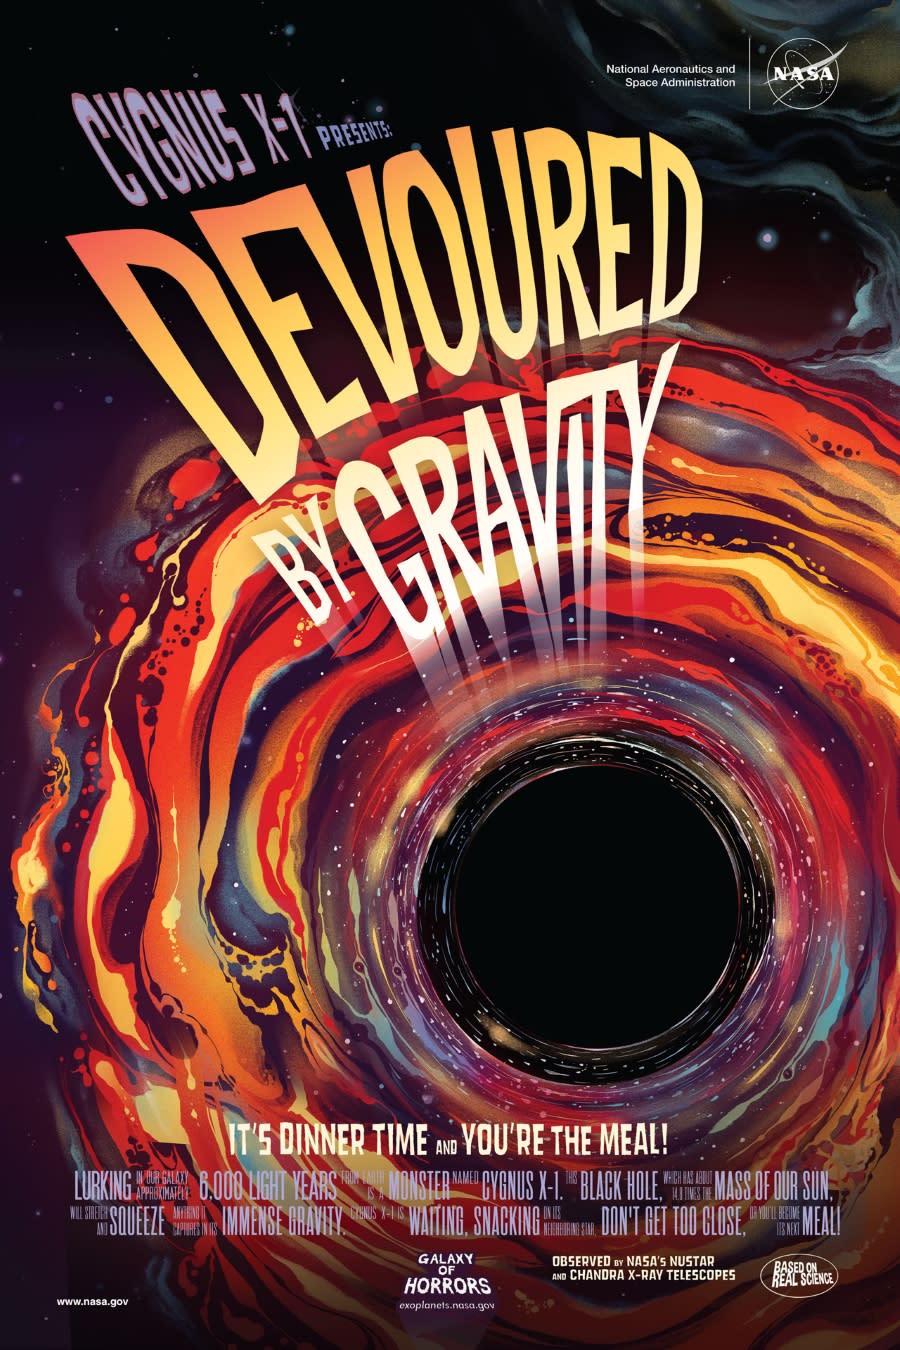 A horror movie posted created by NASA called Devoured by Gravity